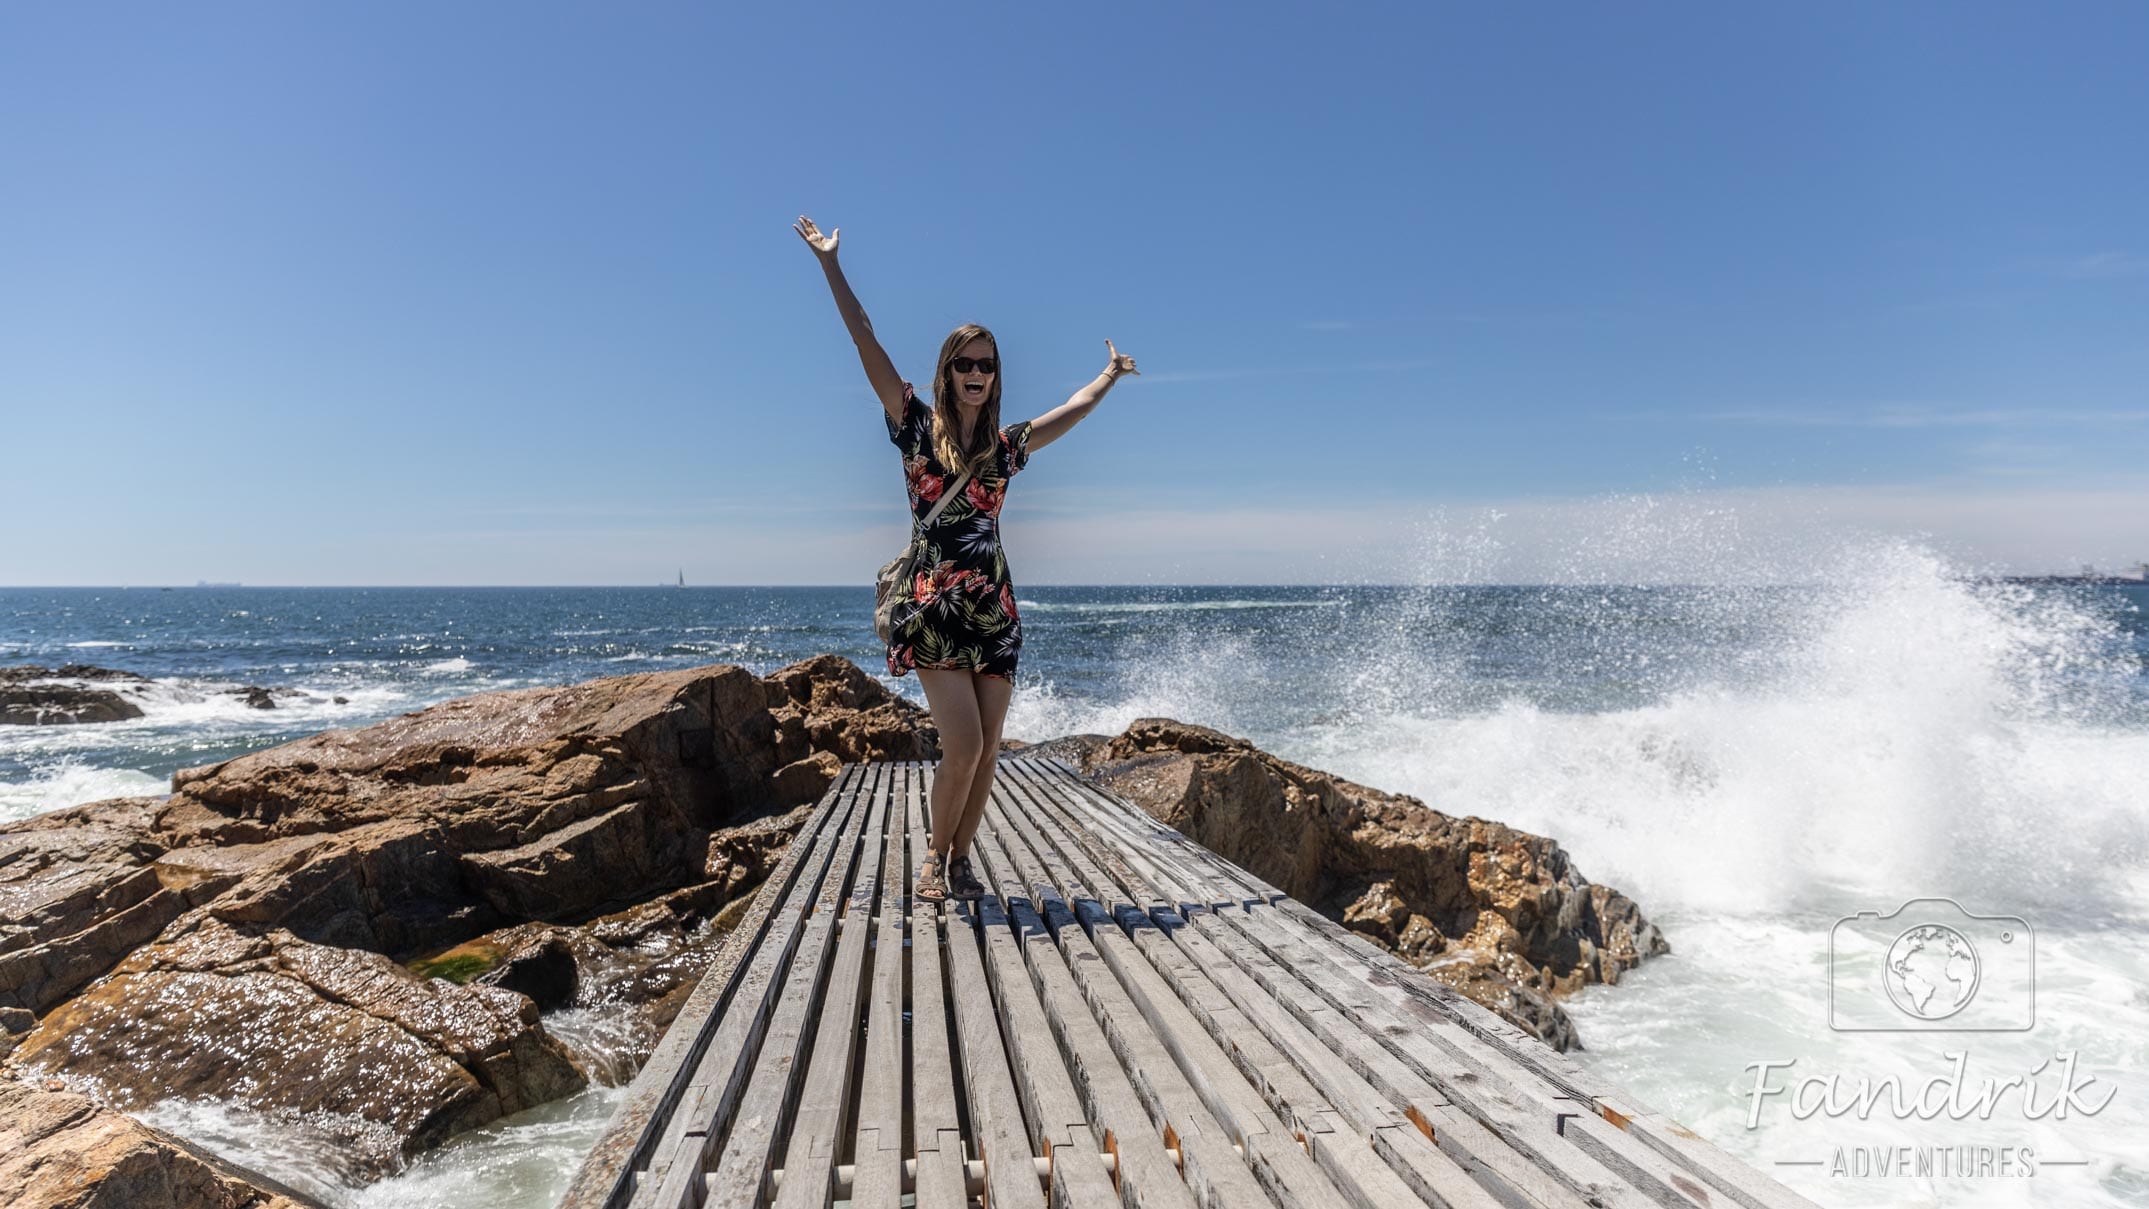 A woman poses on a wooden walkway on the Atlantic coast off Portugal.